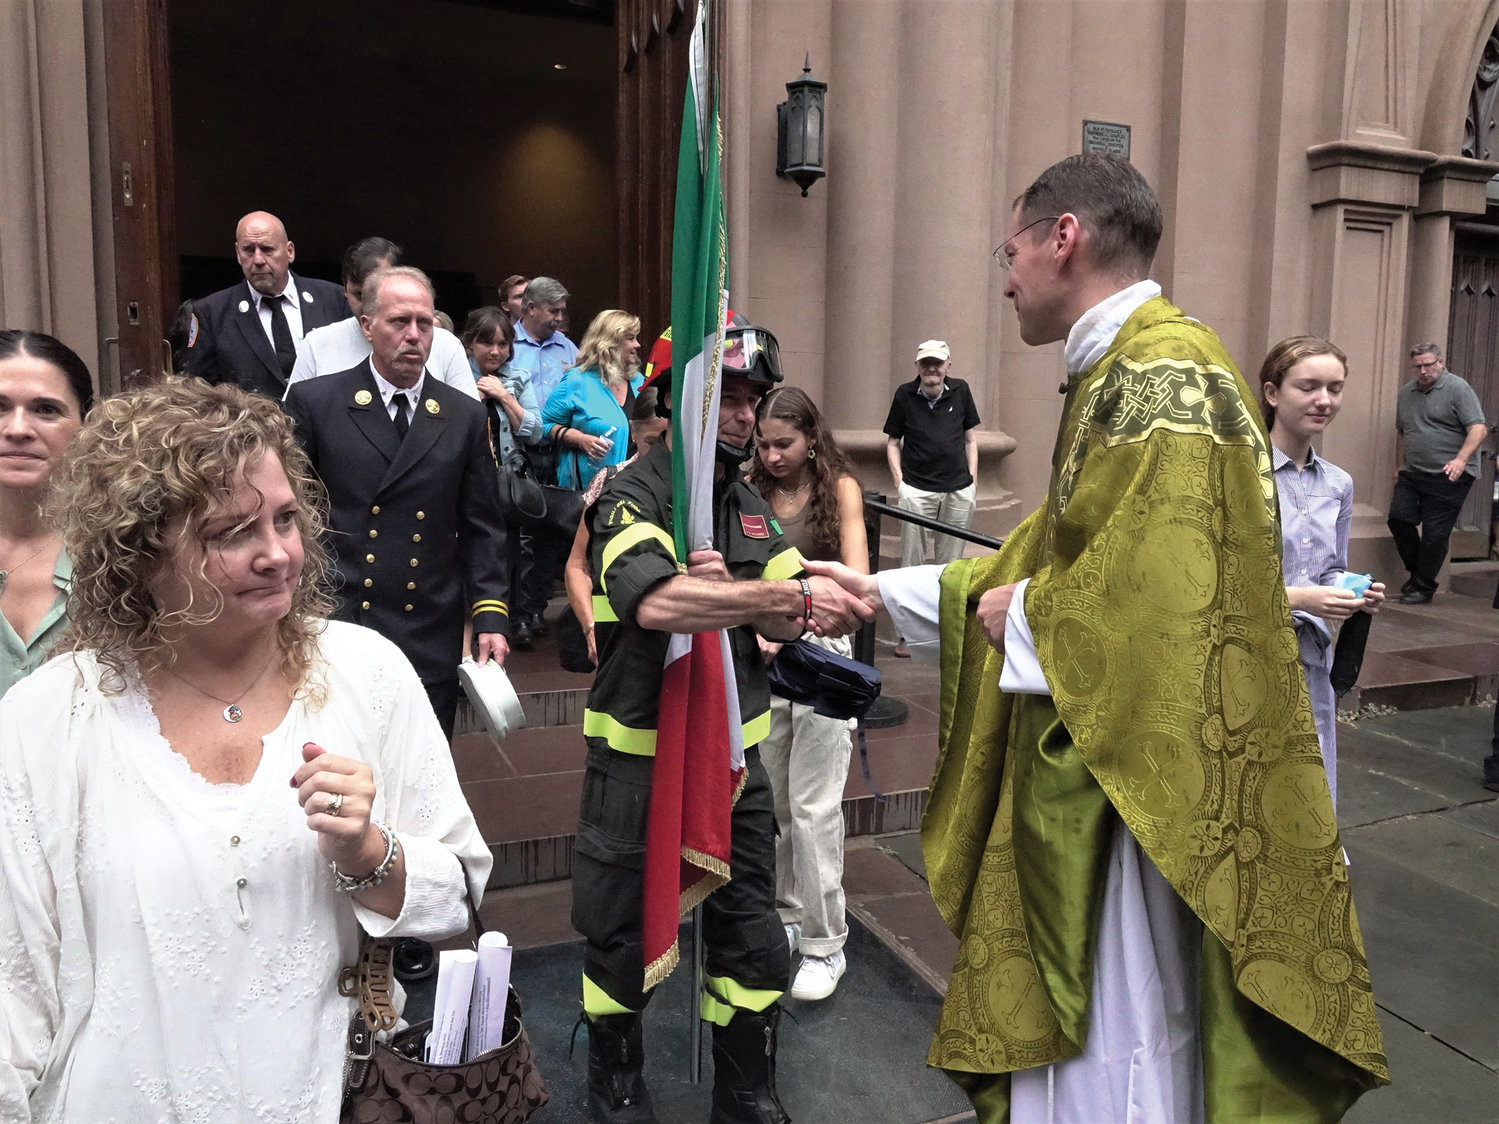 The pastor, Father Brian Graebe, who celebrated the Mass, greets a firefighter afterward.